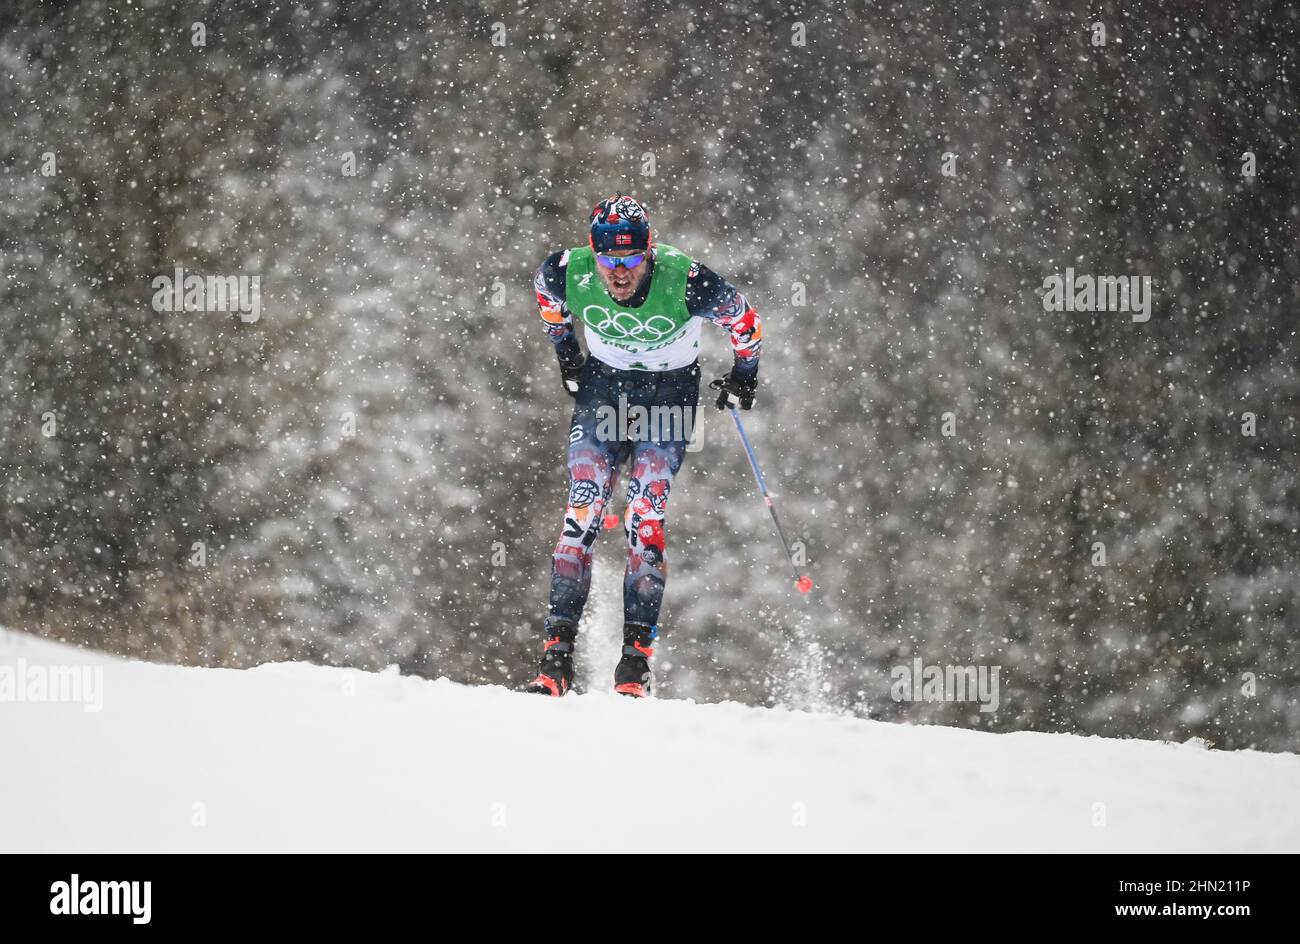 Zhangjiakou, China's Hebei Province. 13th Feb, 2022. Paal Golberg of Norway competes during the cross-country skiing men's 4x10 km relay of the Beijing Winter Olympics at National Cross-Country Skiing Centre in Zhangjiakou, north China's Hebei Province, Feb. 13, 2022. Credit: Deng Hua/Xinhua/Alamy Live News Stock Photo